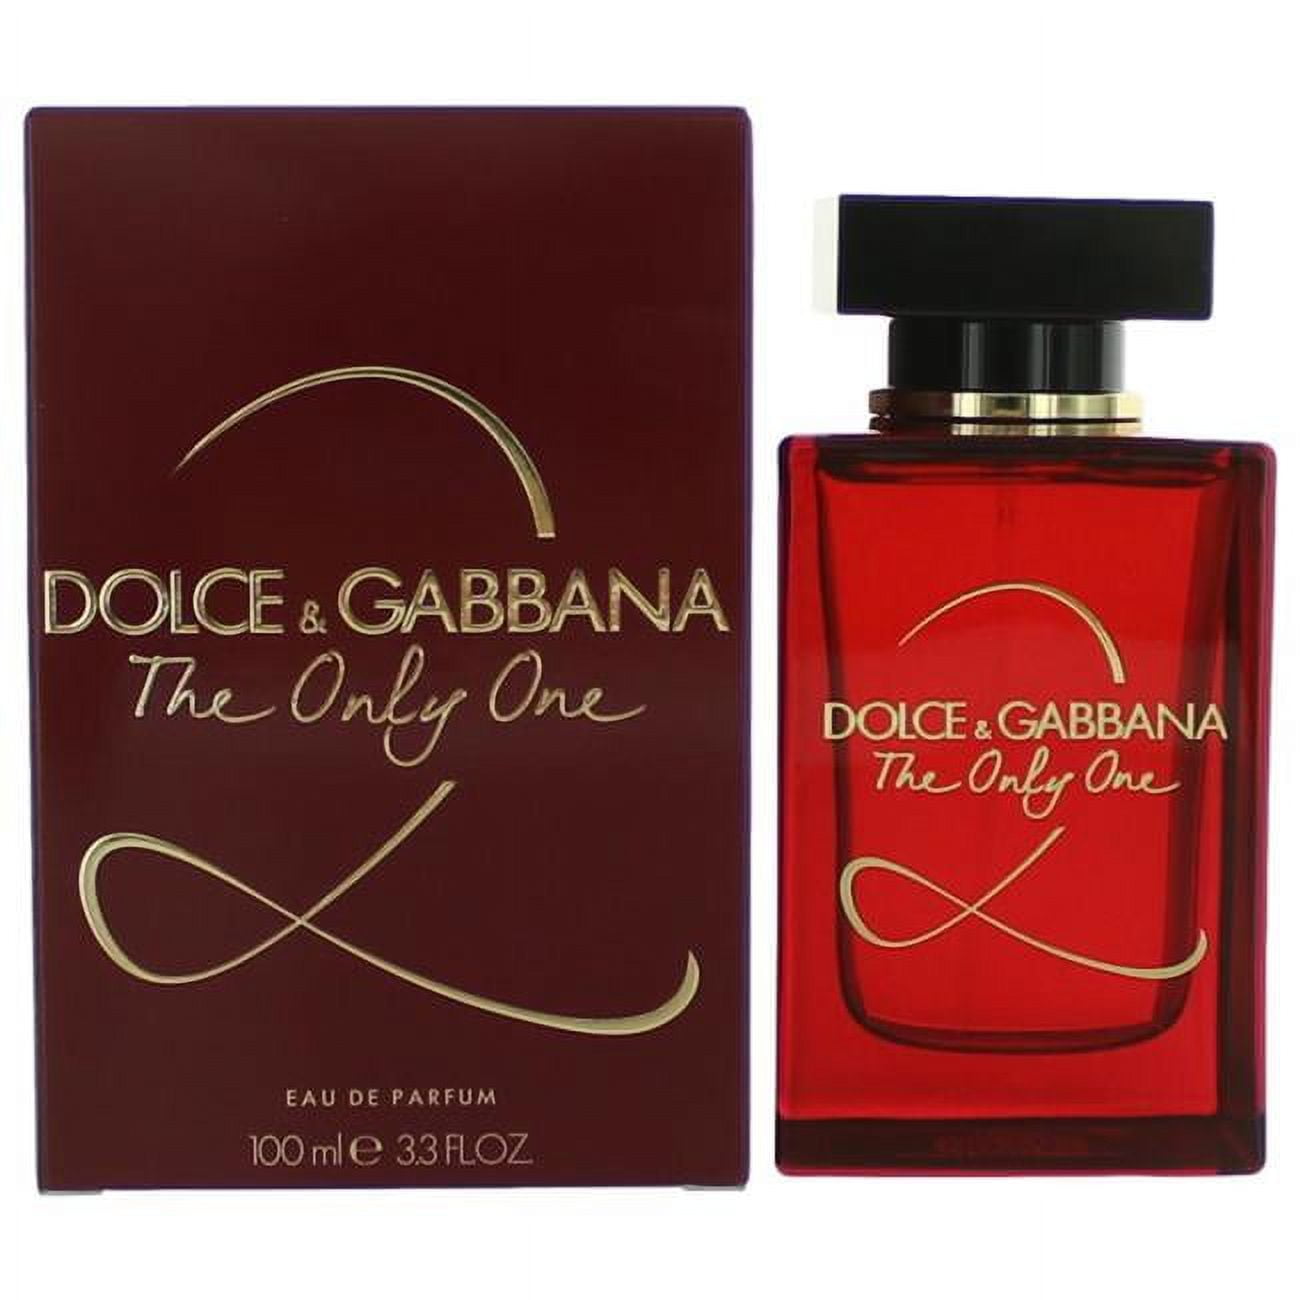 Духи dolce only one. Dolce & Gabbana the only one 100 мл. Dolce Gabbana the only one 2 100 мл. Dolce & Gabbana the only one, EDP., 100 ml. Dolce Gabbana the only one 2 30 мл.